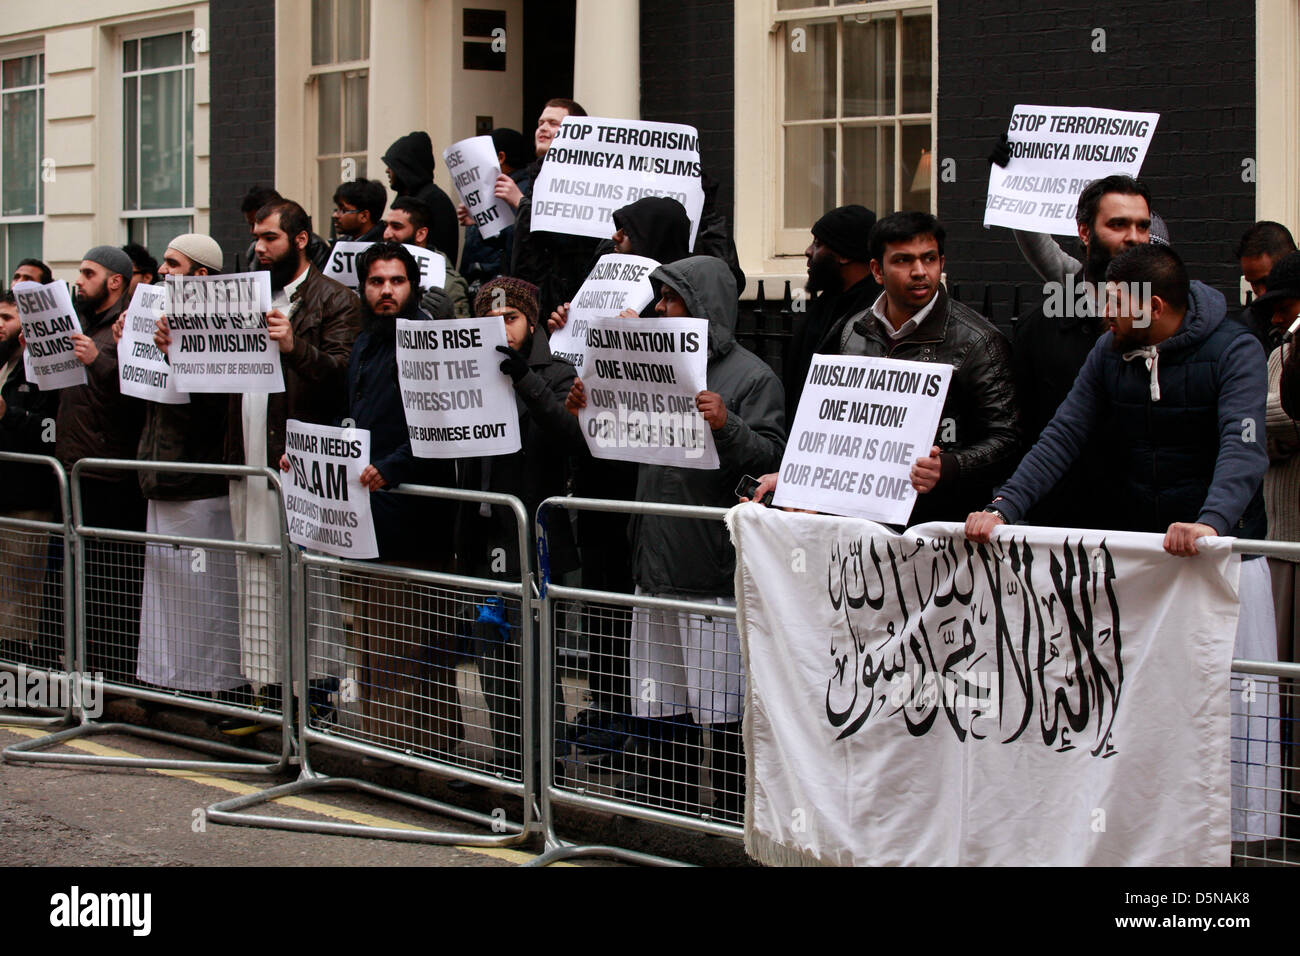 LONDON, 5 April 2013. Muslim demonstration against Burmese and Sri Lankan aggression took place at Hyde Park Gardens (Sri Lanka Embassy) and Charles Street (Burmese Embassy).Women men and children were present at both protests holding placards and singing along. Stock Photo